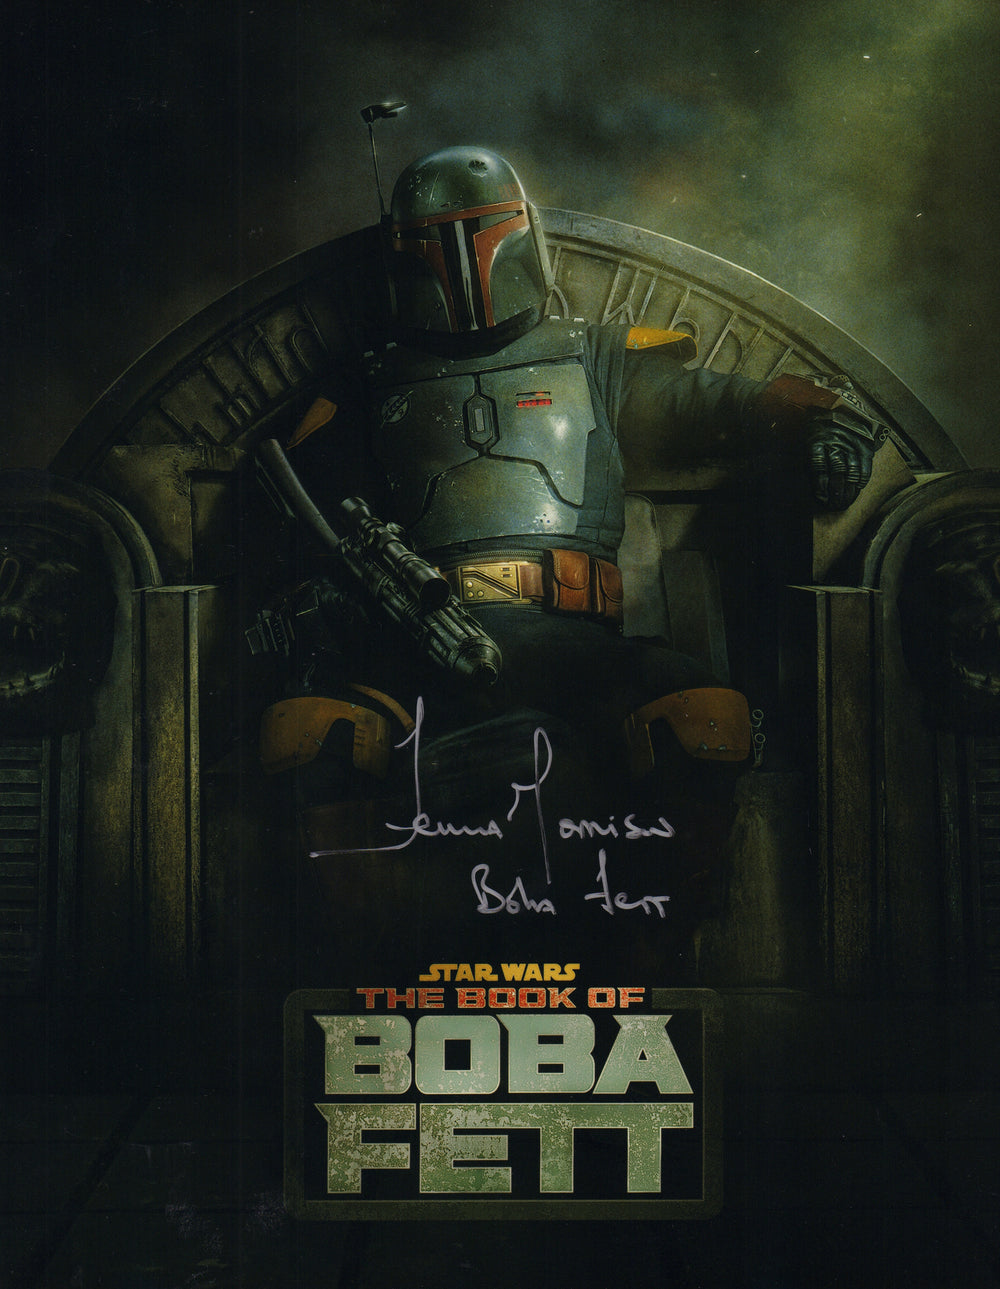 Temuera Morrison as Boba Fett in Star Wars: The Book of Boba Fett Signed 11x14 Photo